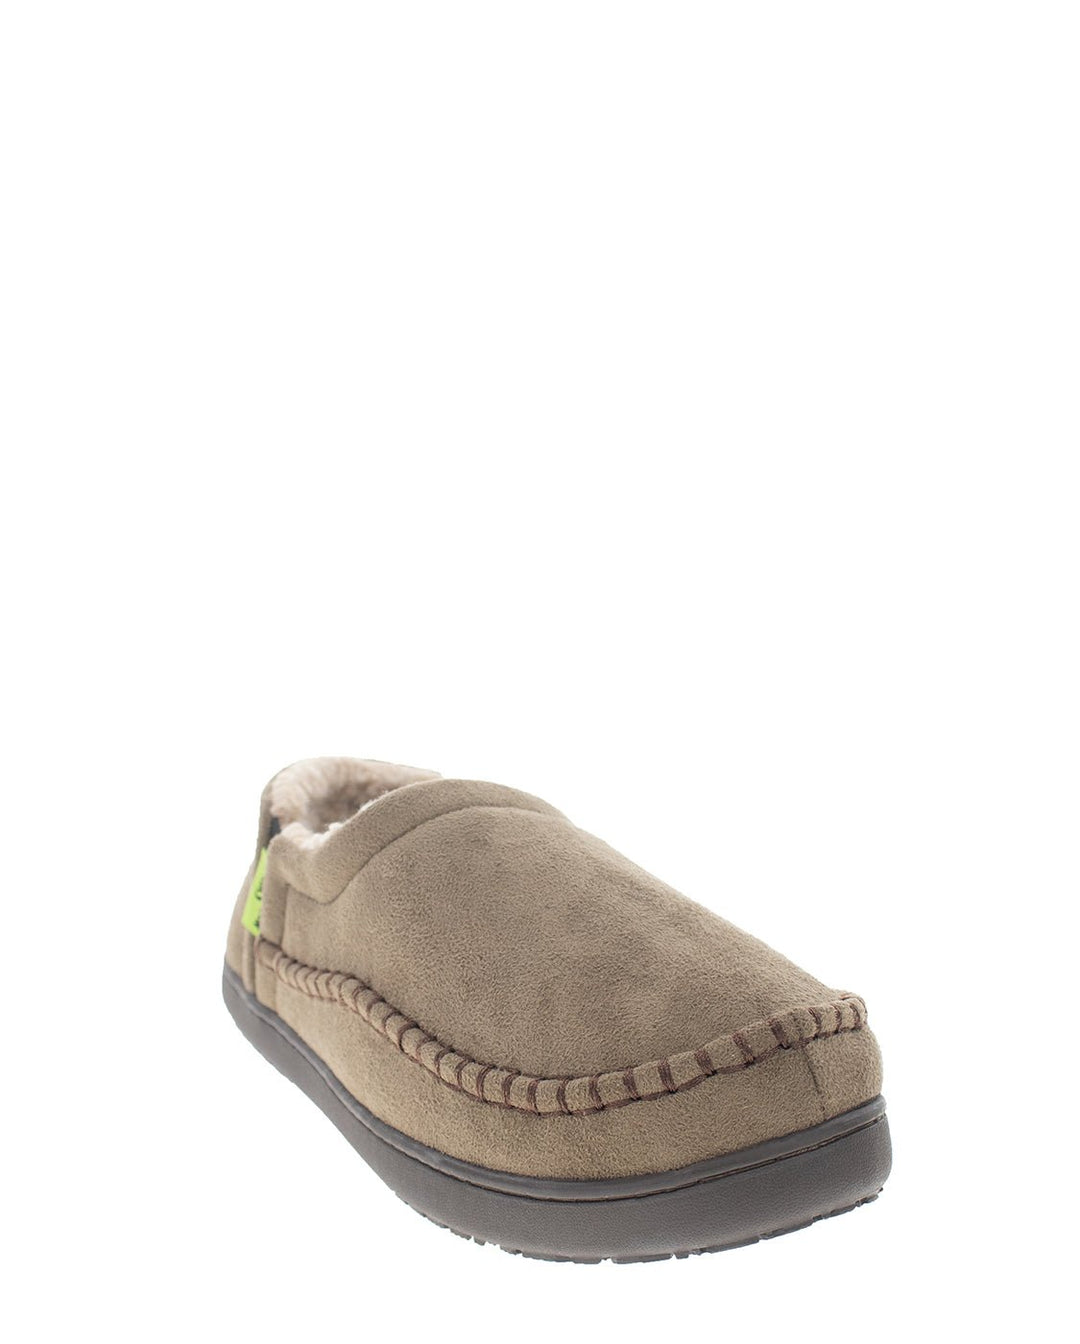 Men's Roy Slipper - Taupe - Western Chief